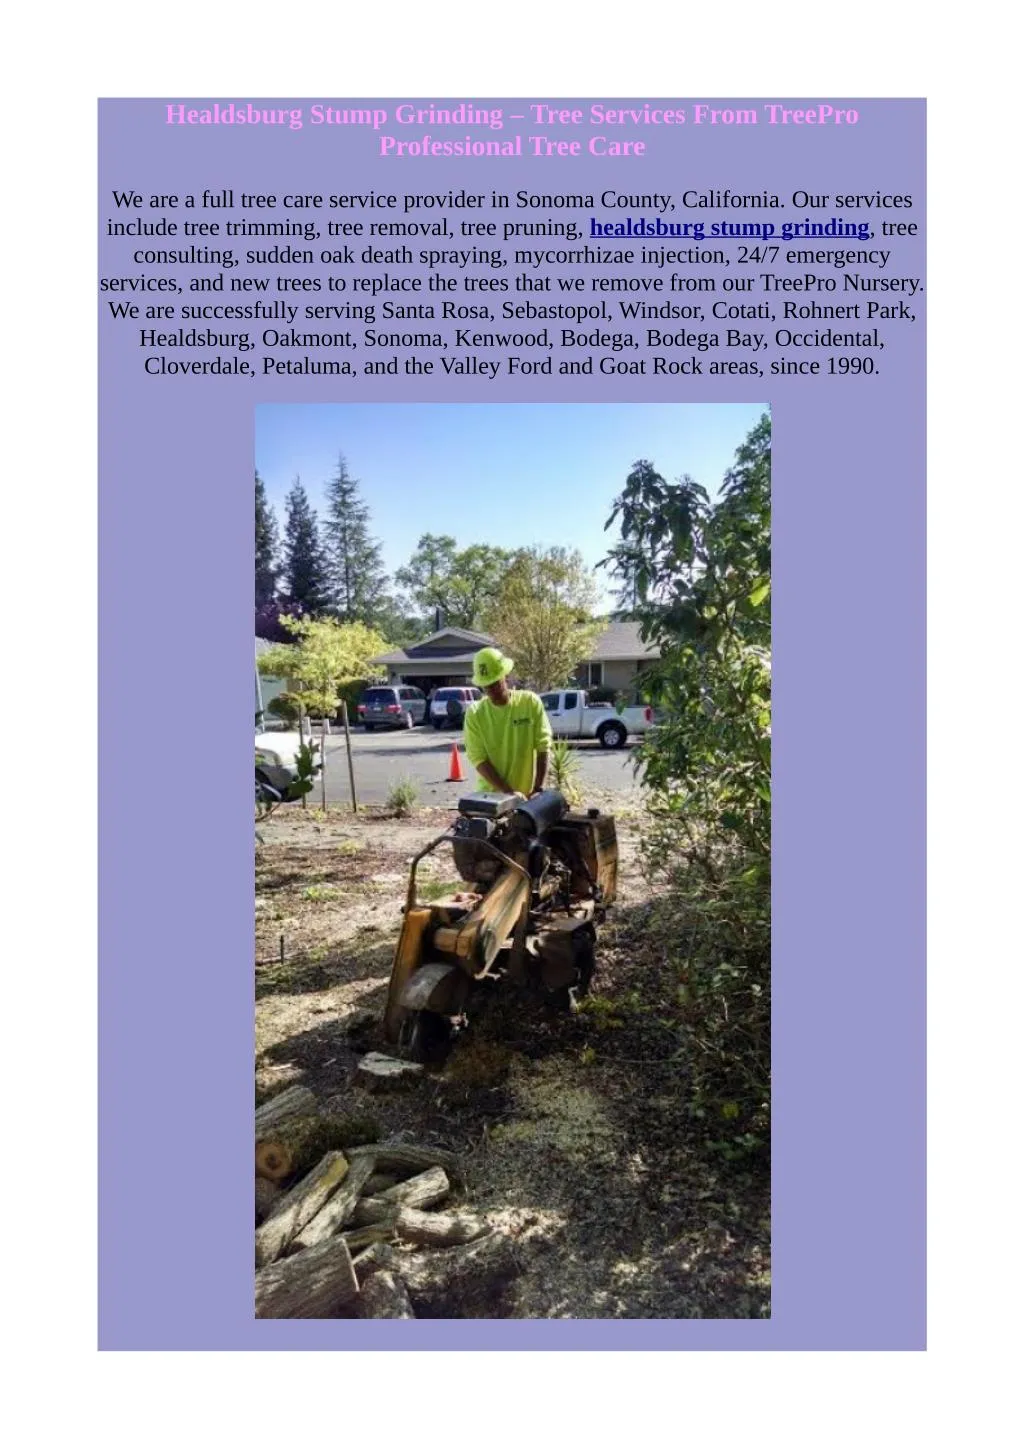 healdsburg stump grinding tree services from